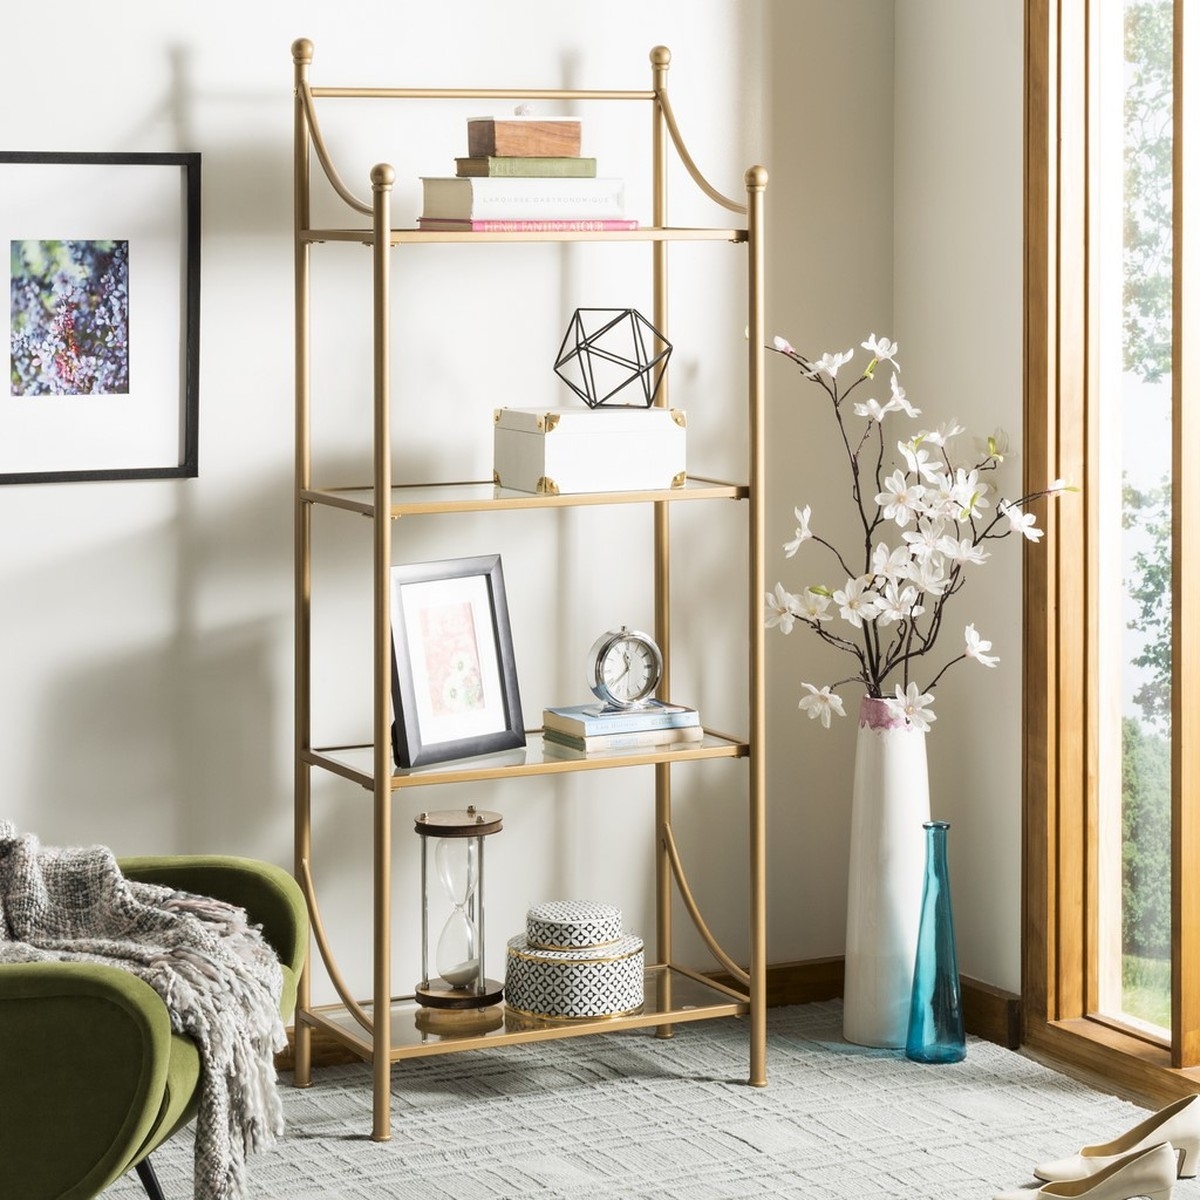 Diana 4 Tier Etagere - Gold Liquid/Tempered Glass - Arlo Home - Image 3